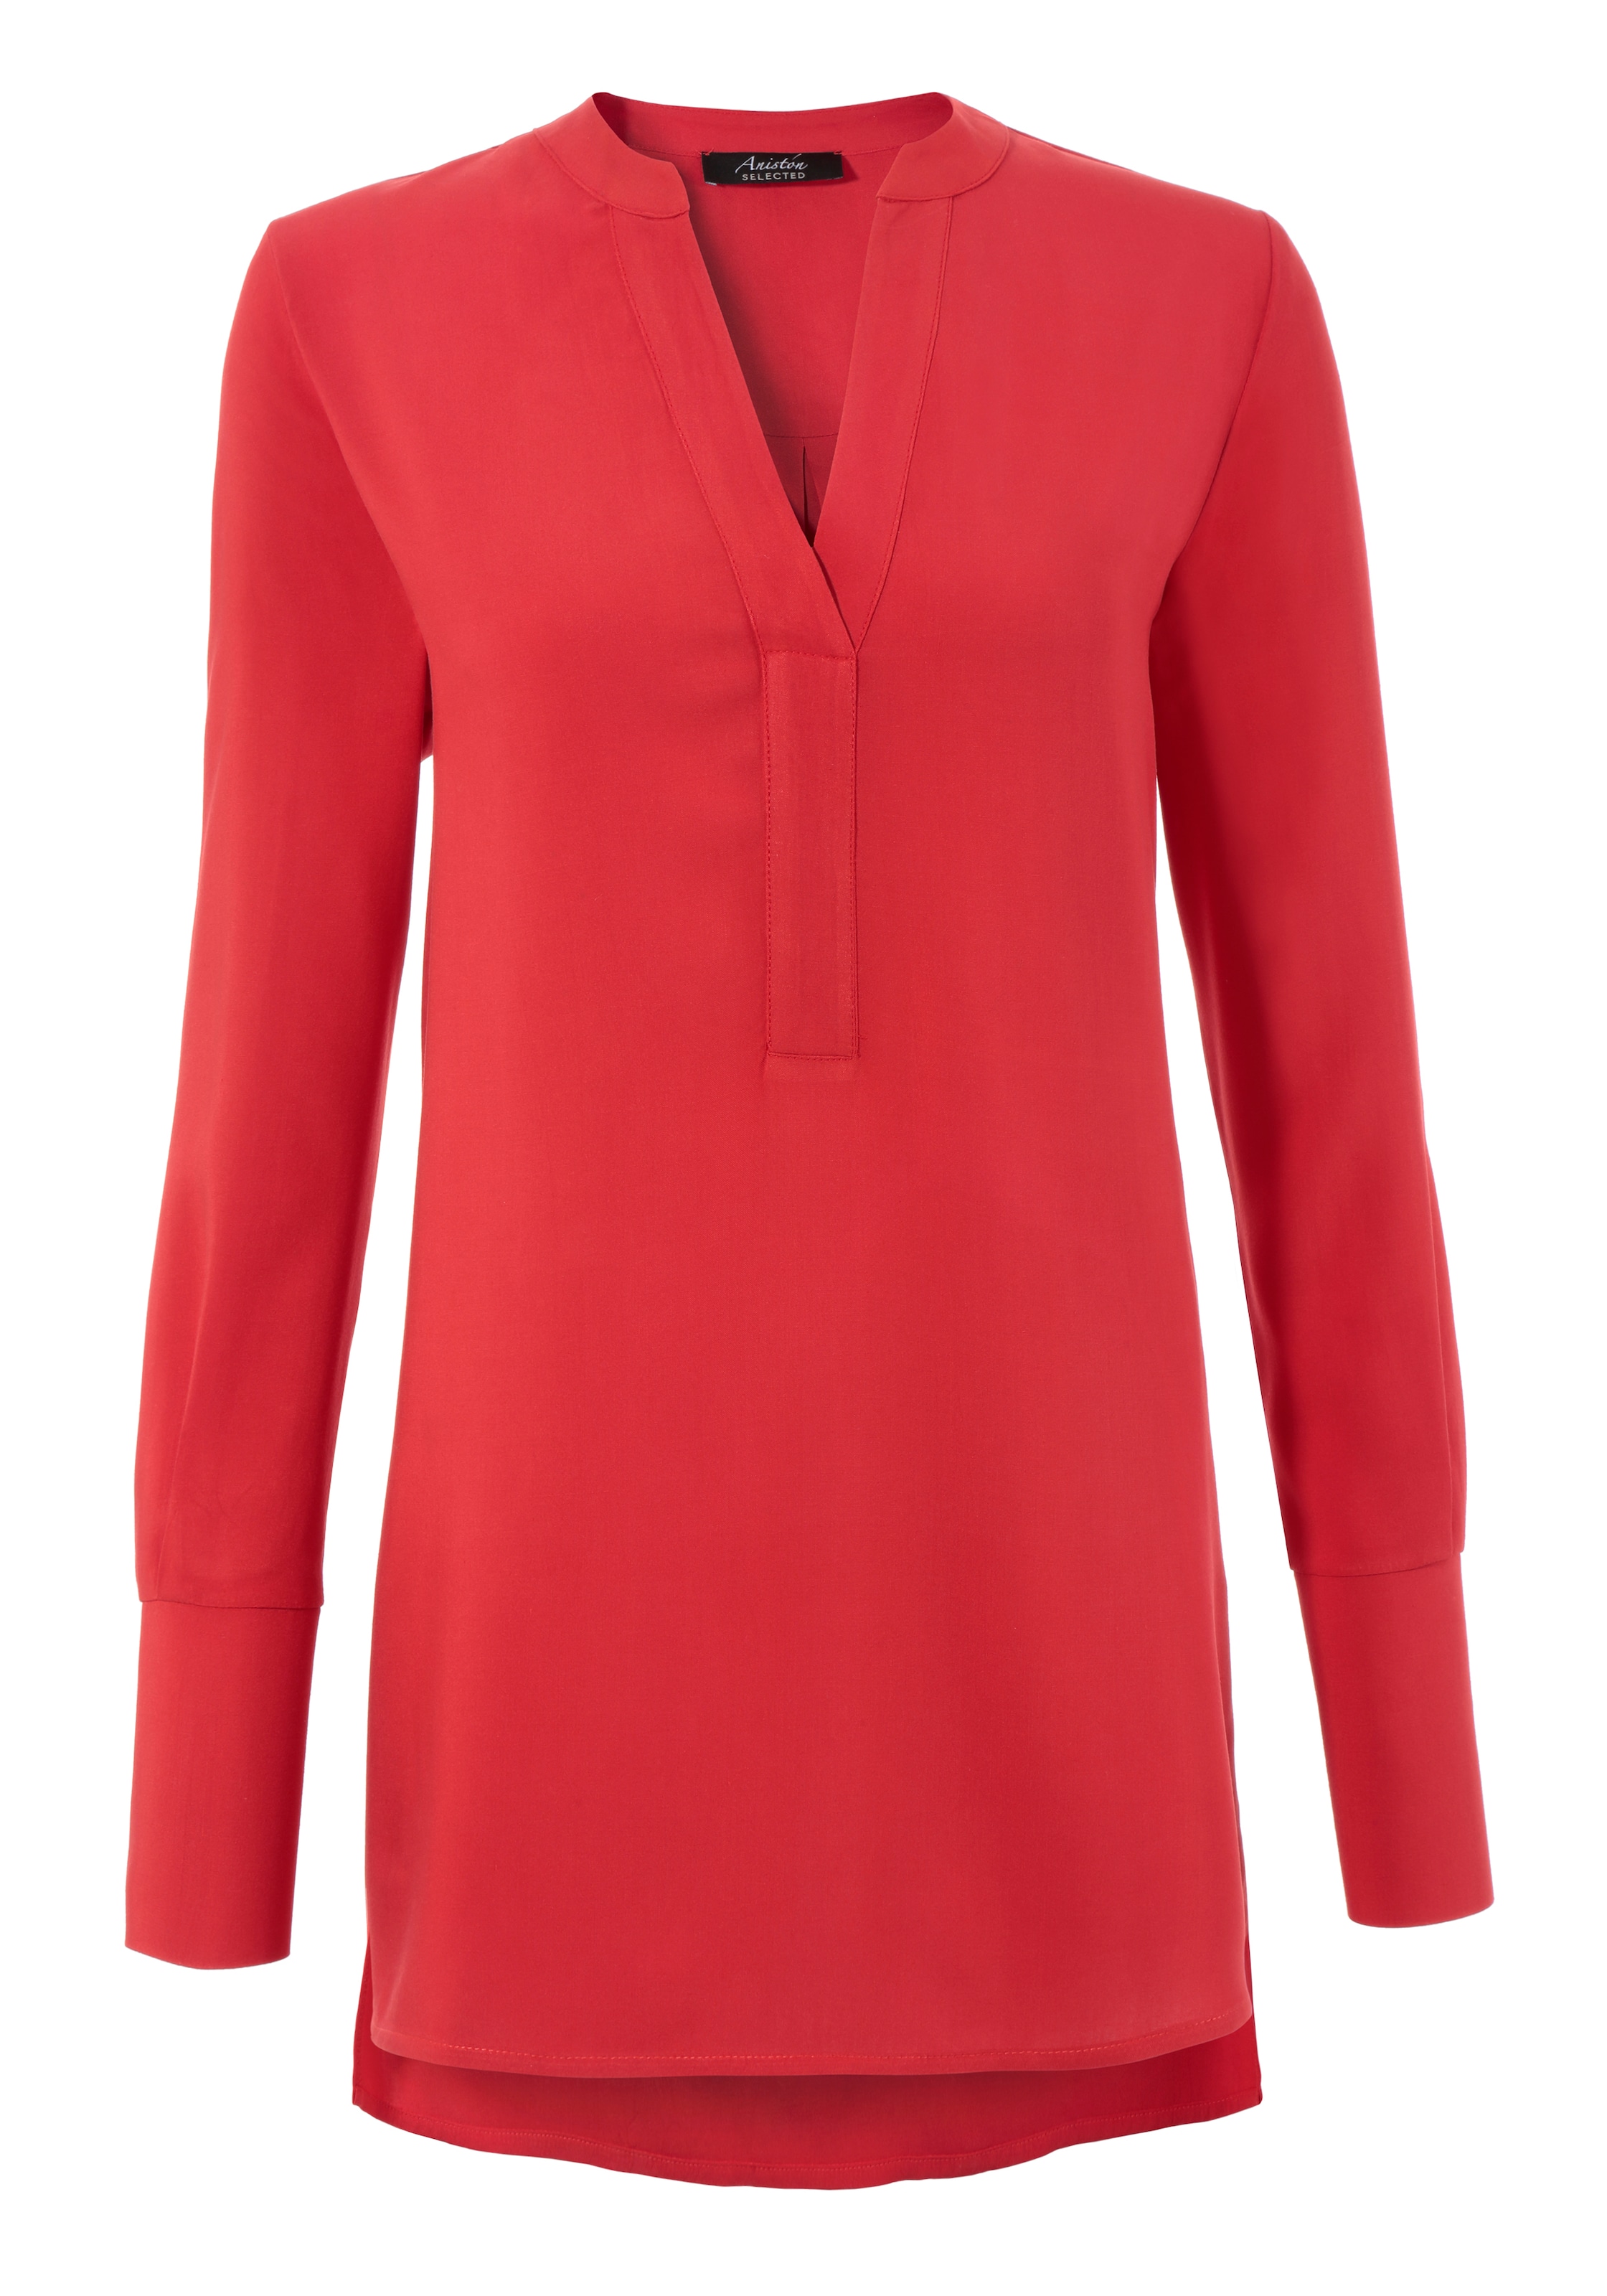 Aniston SELECTED Bluse in Feuerrot 